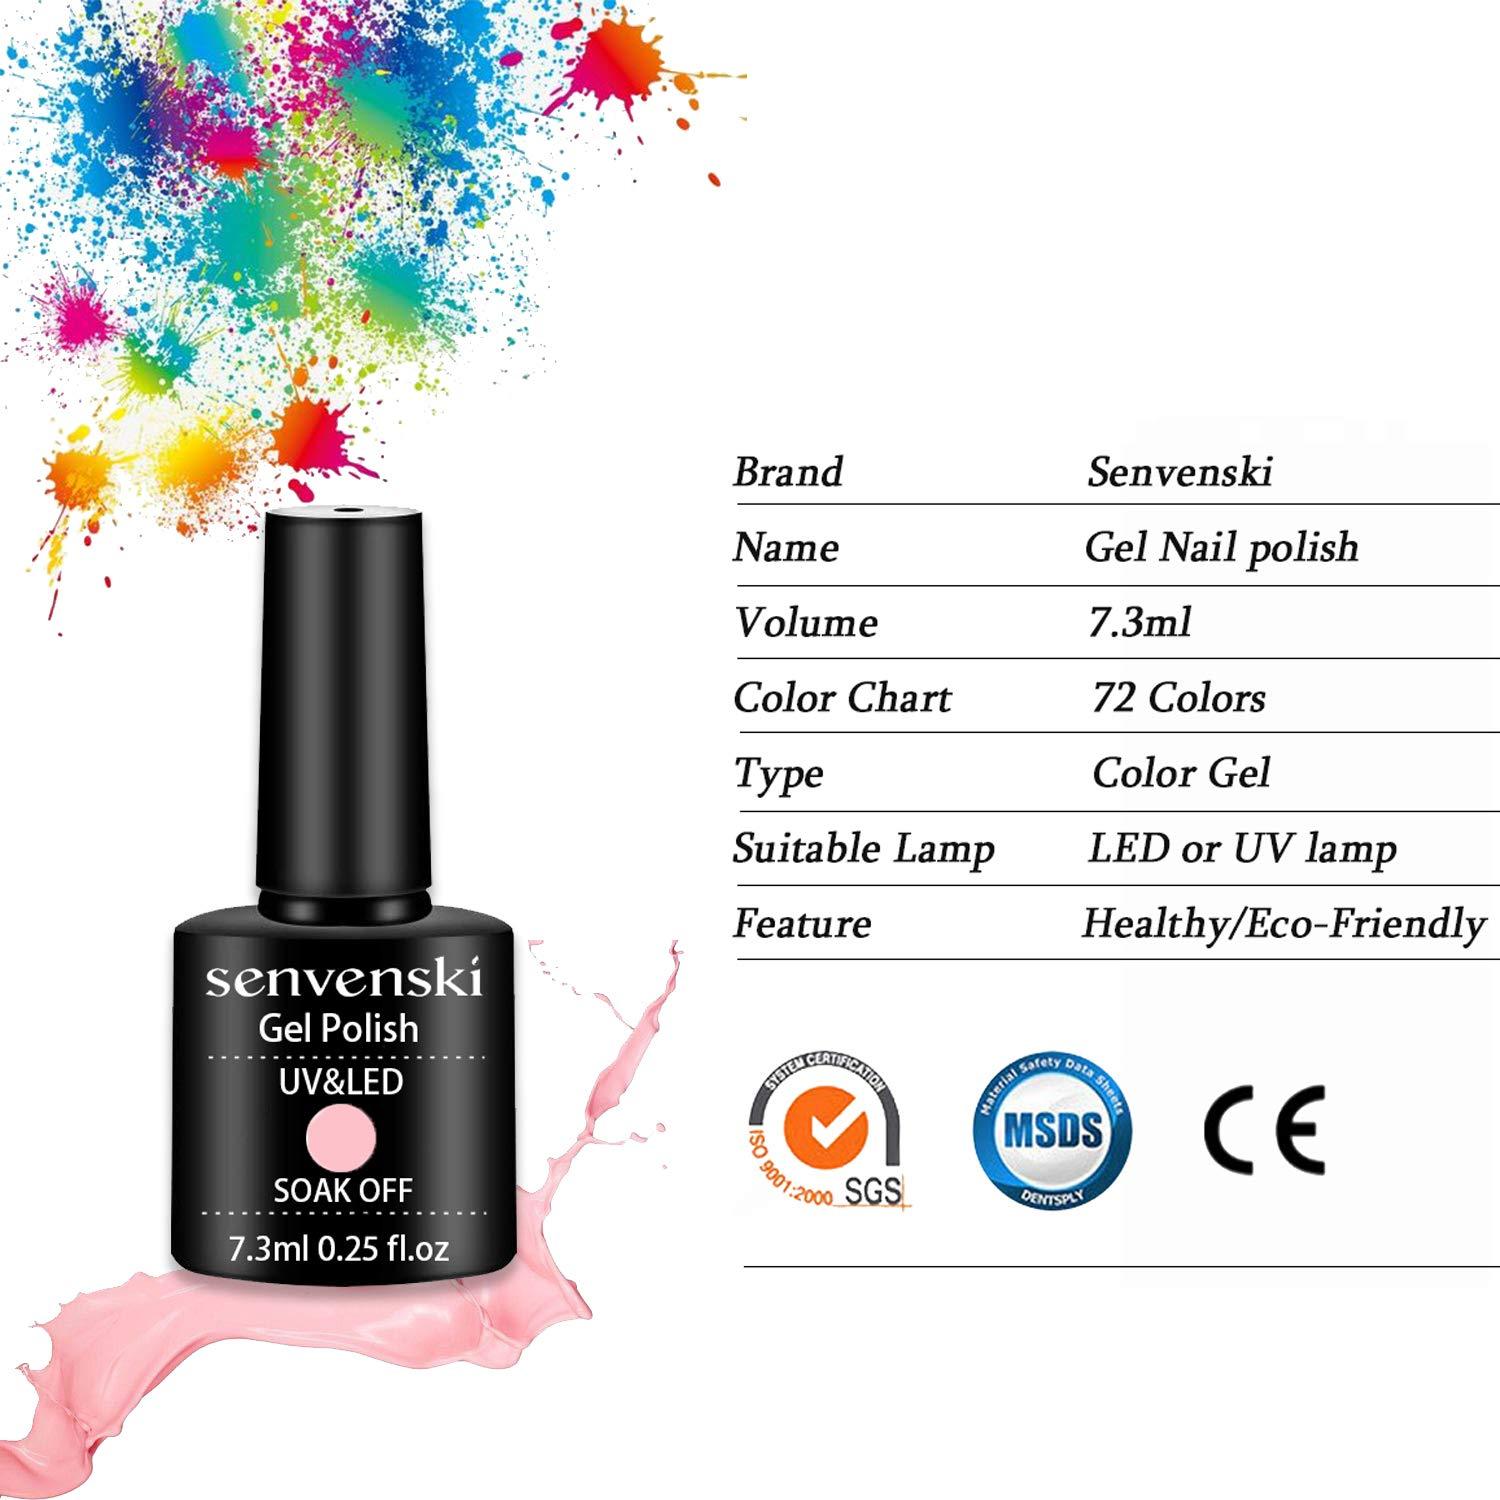 The best nail polish you can buy | Business Insider India